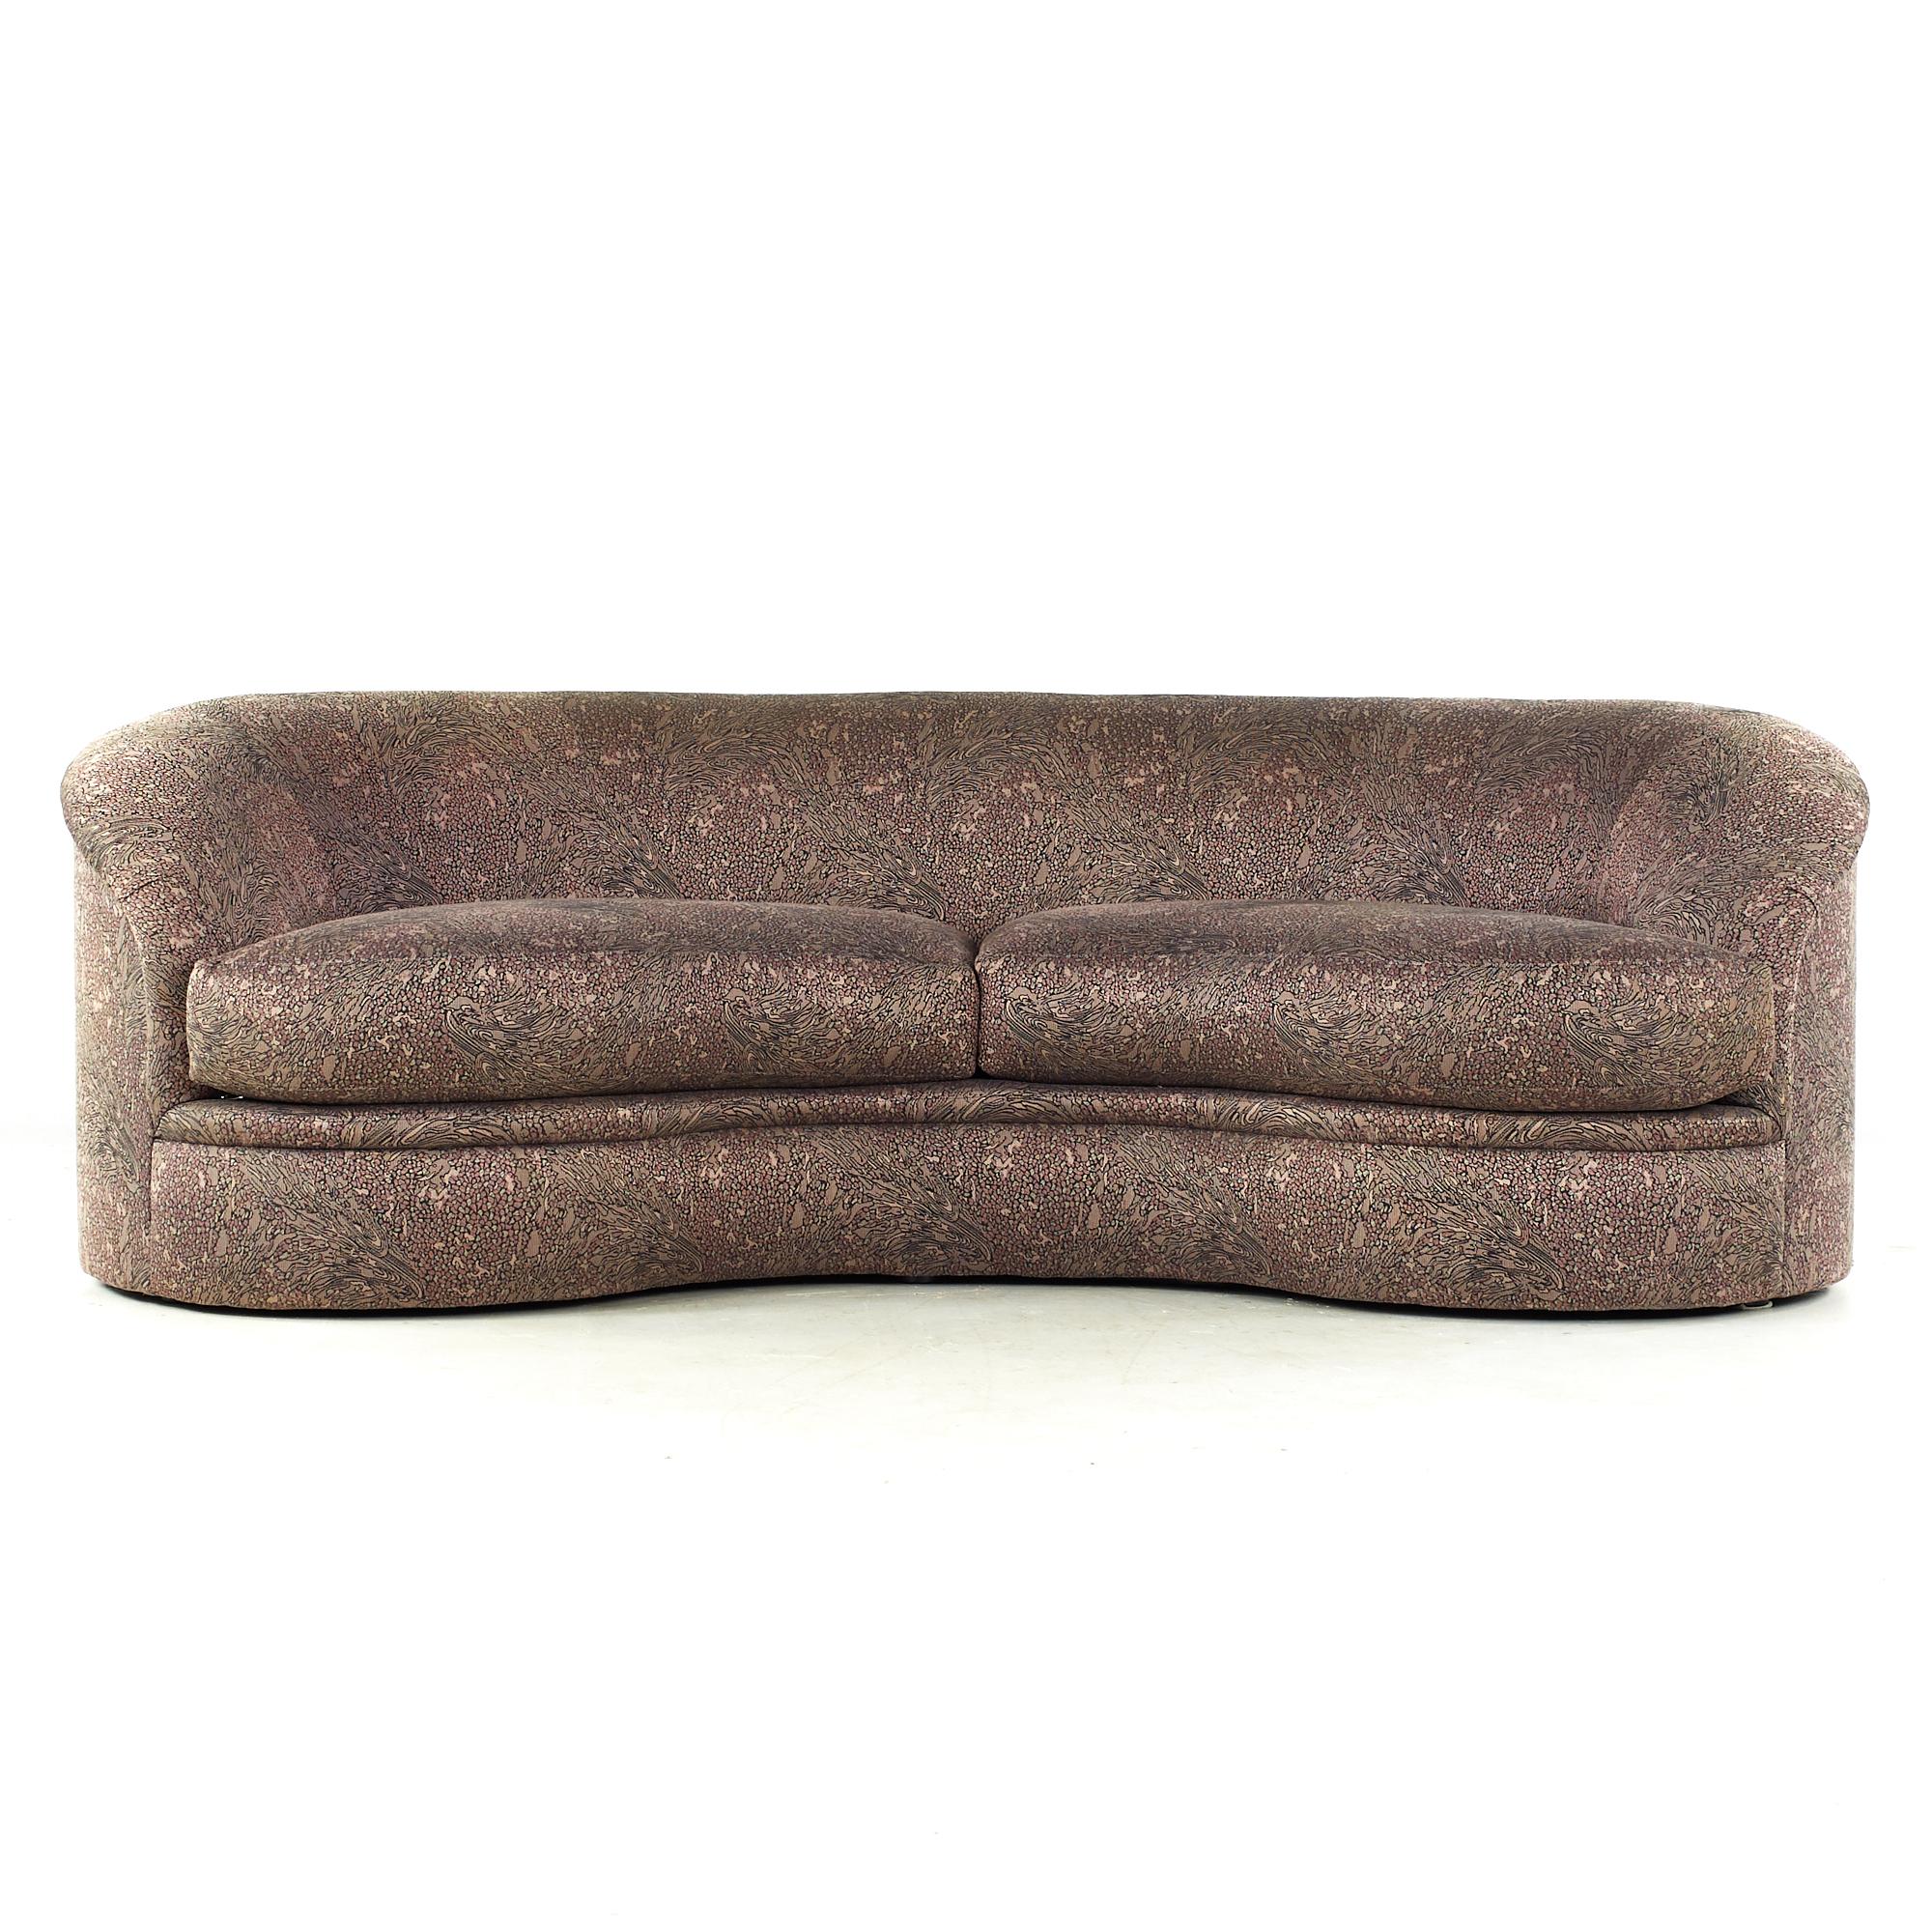 Mid-Century Modern Kagan for Directional Mid Century Kidney Sofa For Sale